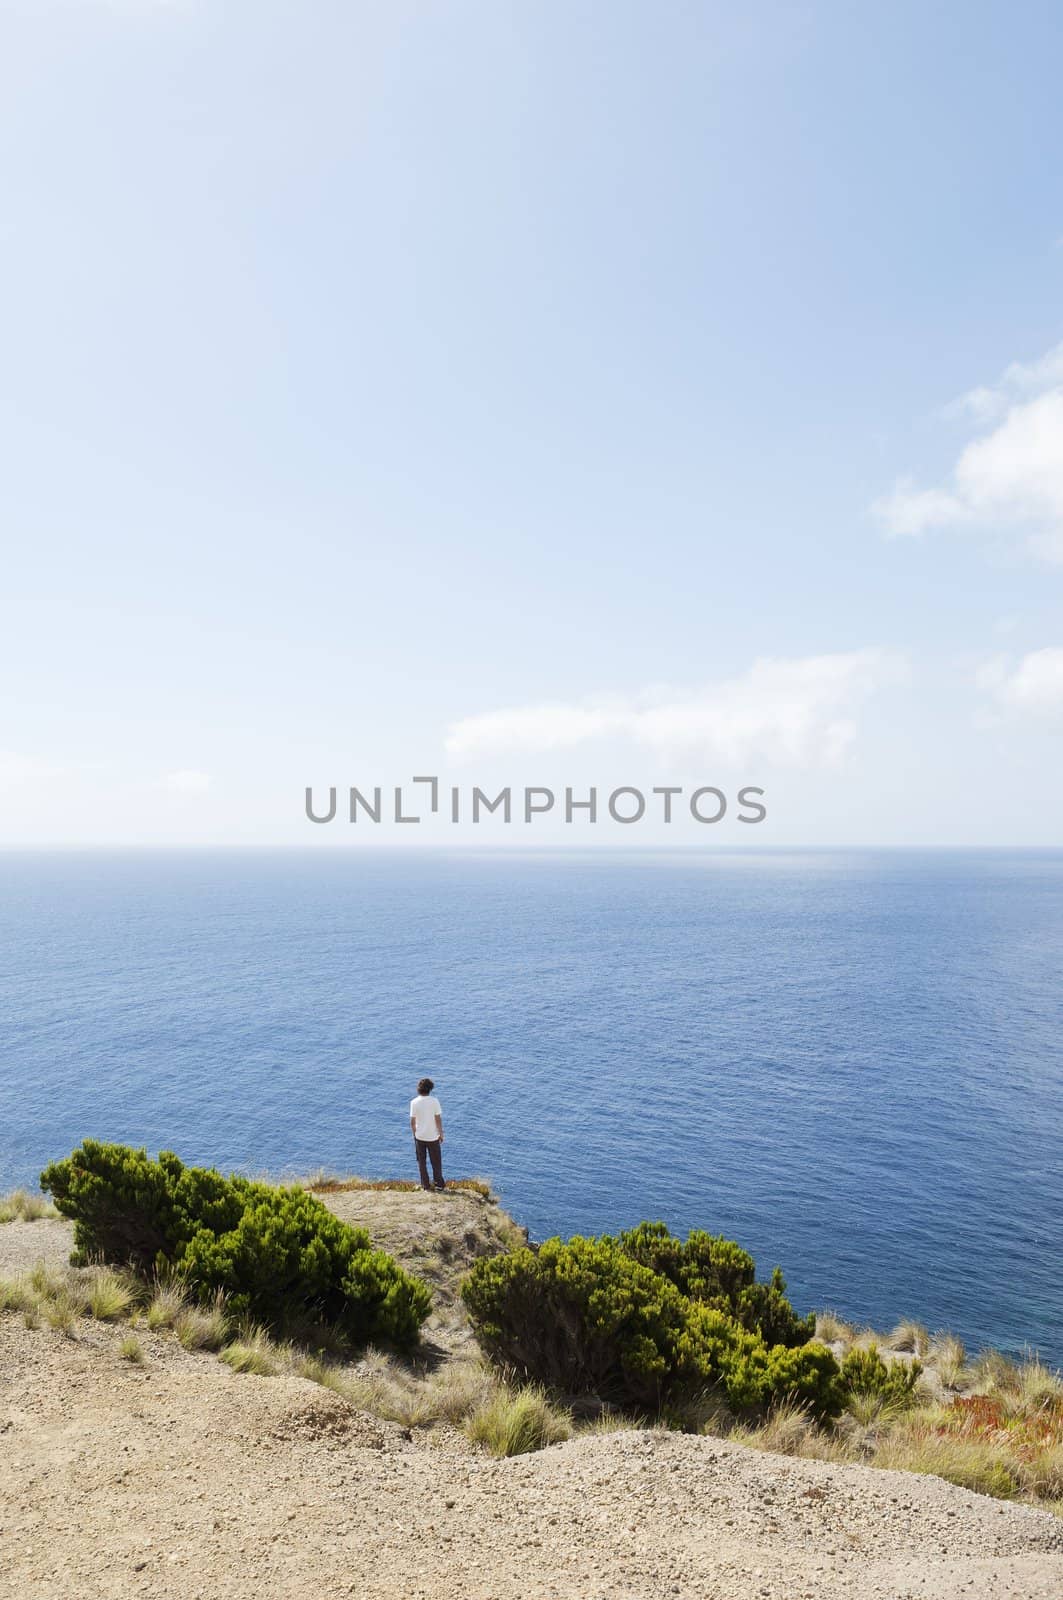 Man at the edge of a cliff  looking at sea in Faial island, Azores, Portugal